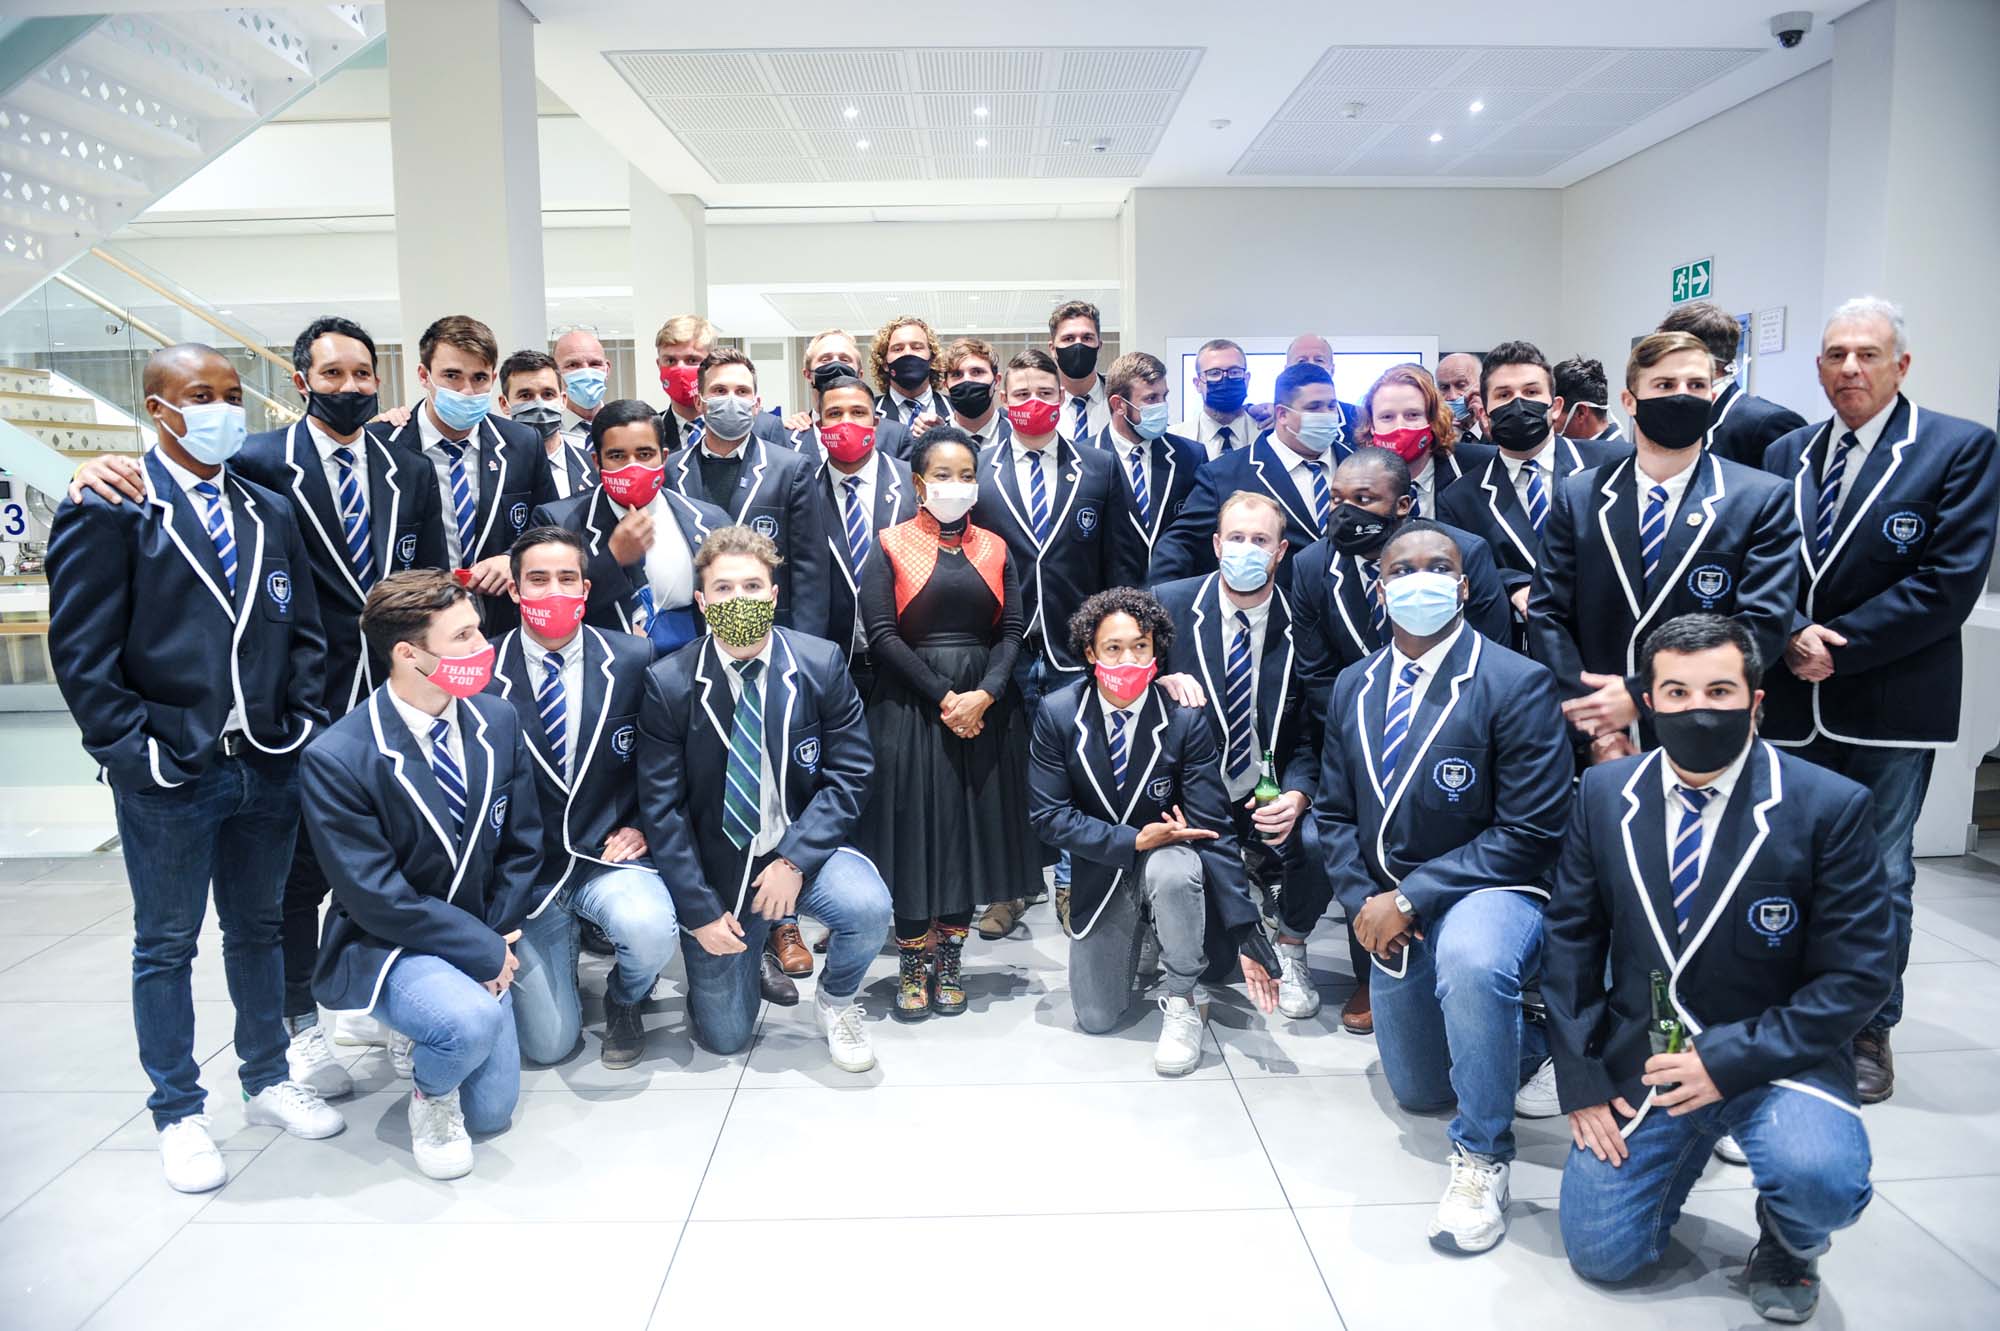 Vice-Chancellor Mamokgethi Phakeng hosted the UCT Ikeys rugby team for dinner at the GSB conference centre. The Ikeys came second in the Varsity Cup tournament, after a great season.